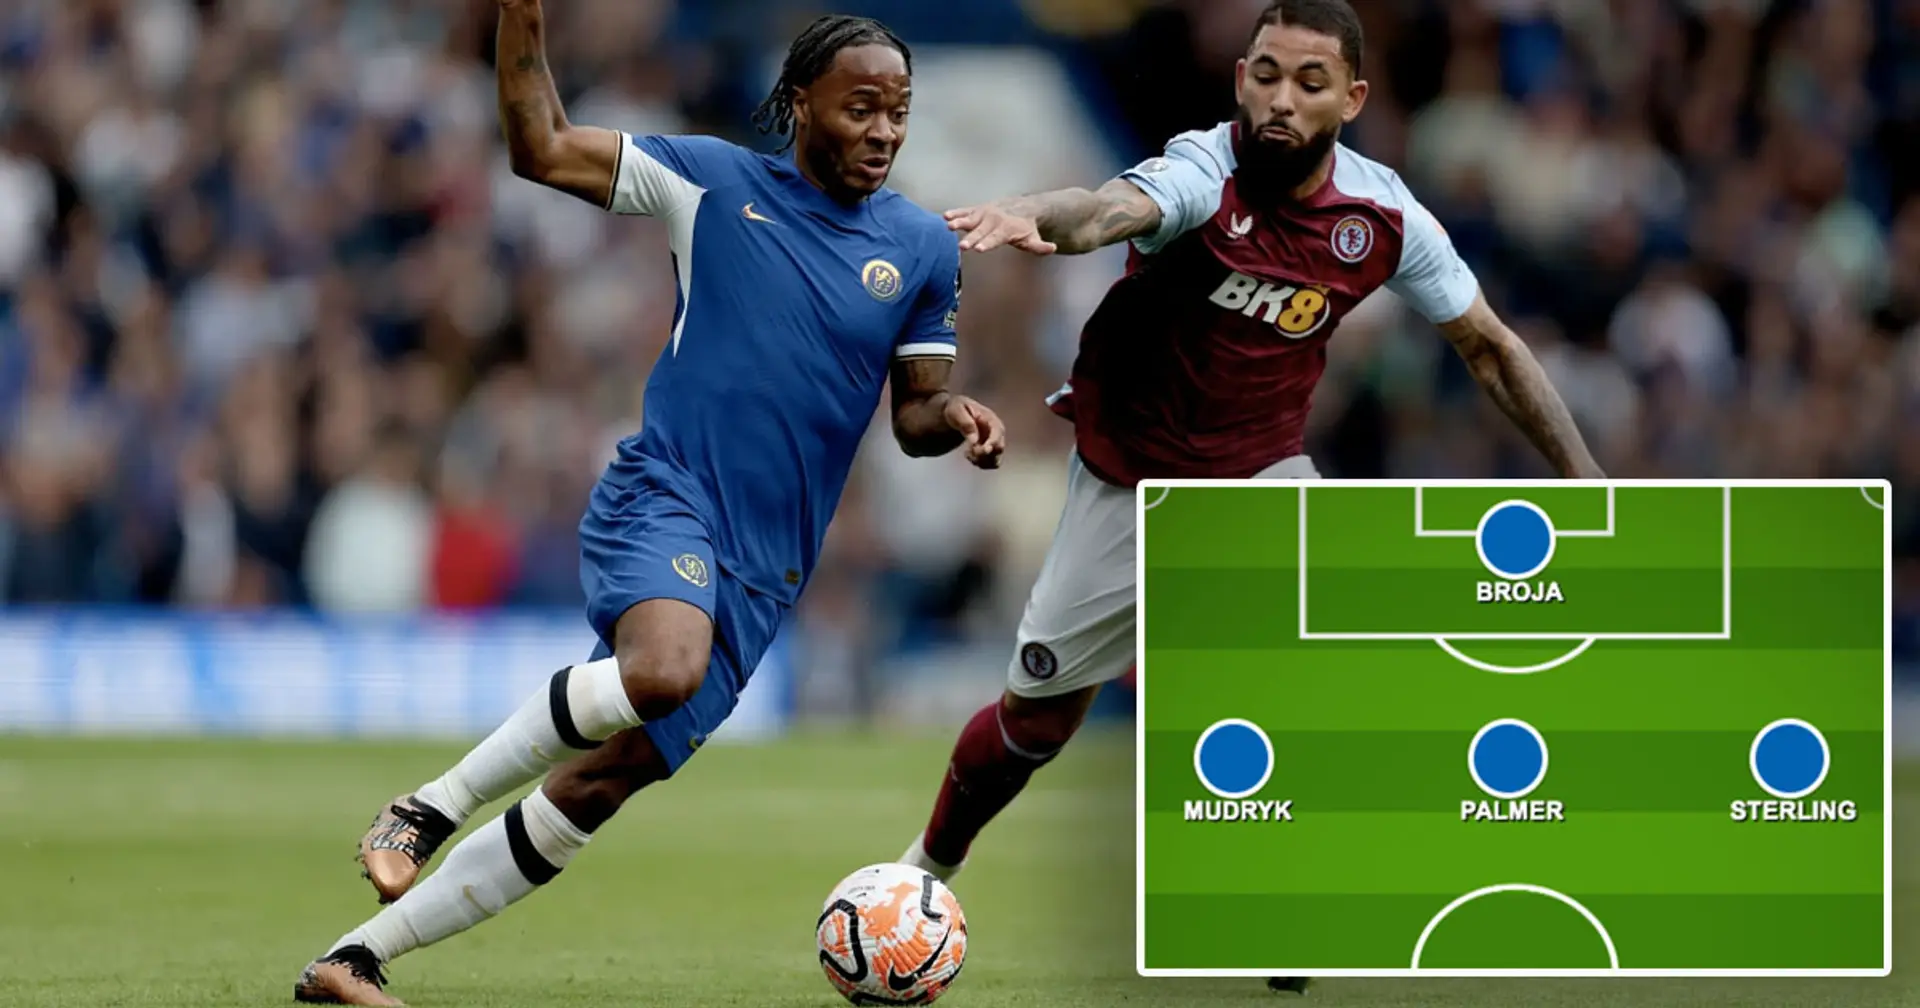 Chelsea vs Aston Villa: Probable line-ups, best betting tips and correct score predicted by AI